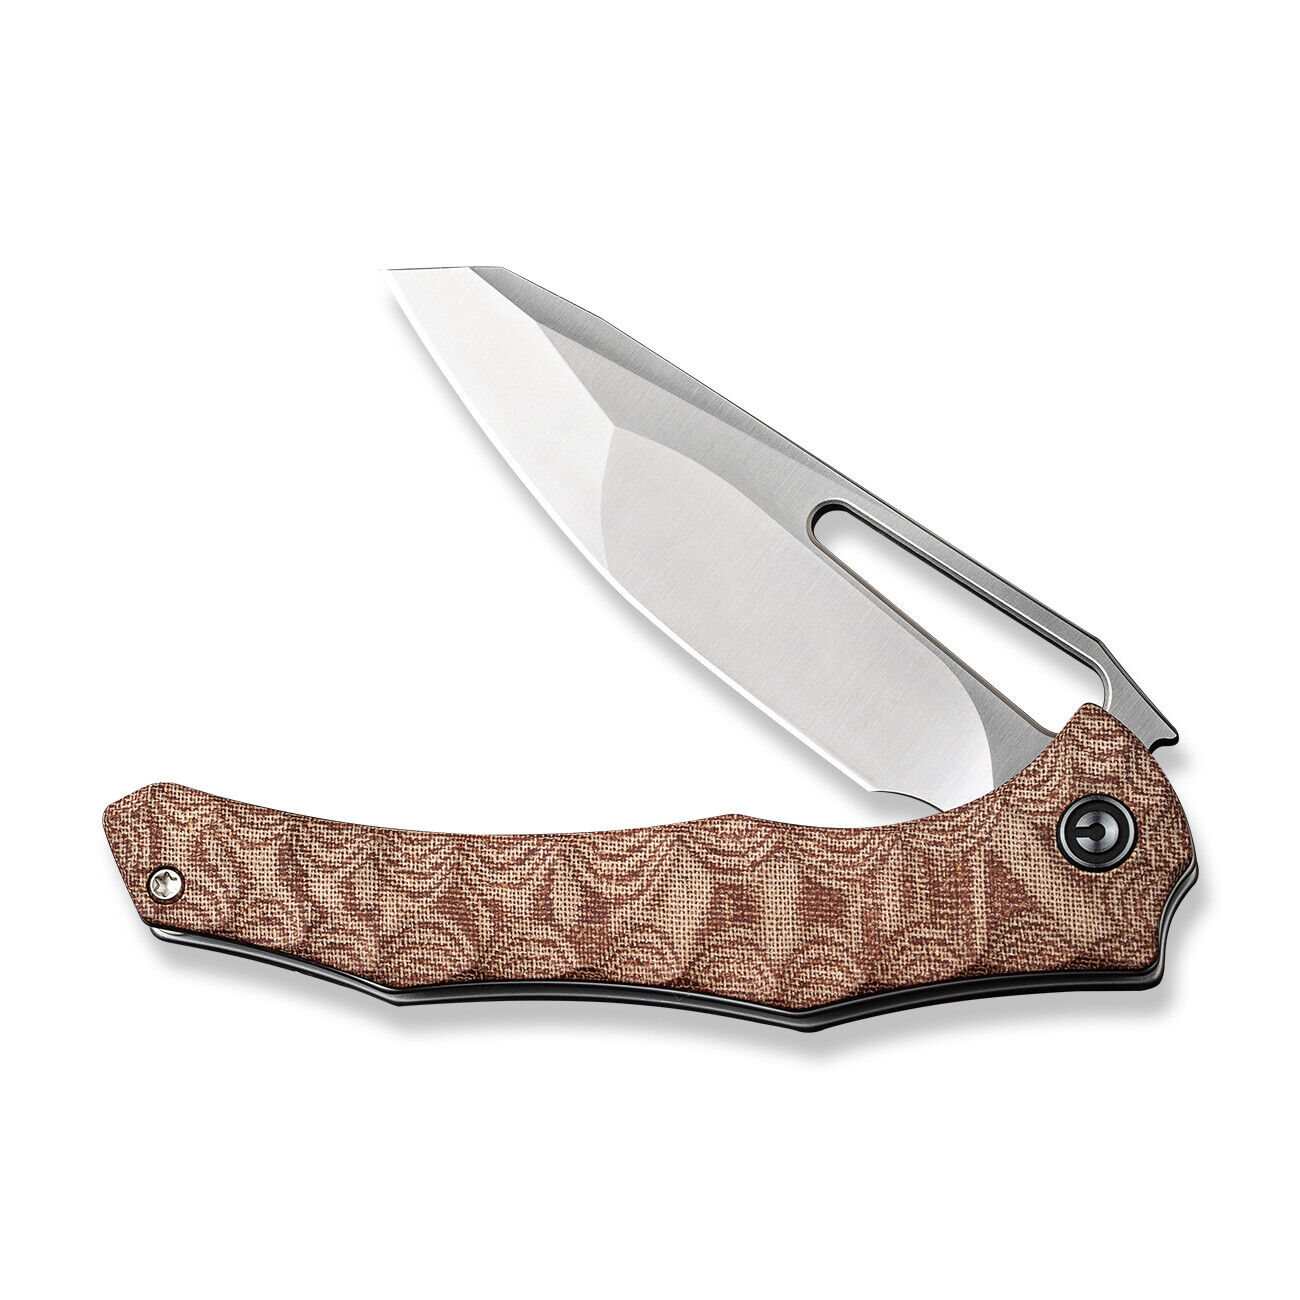 Civivi Knives Spiny Dogfish C22006-4 Brown Micarta 14C28N Pocket Knife Stainless